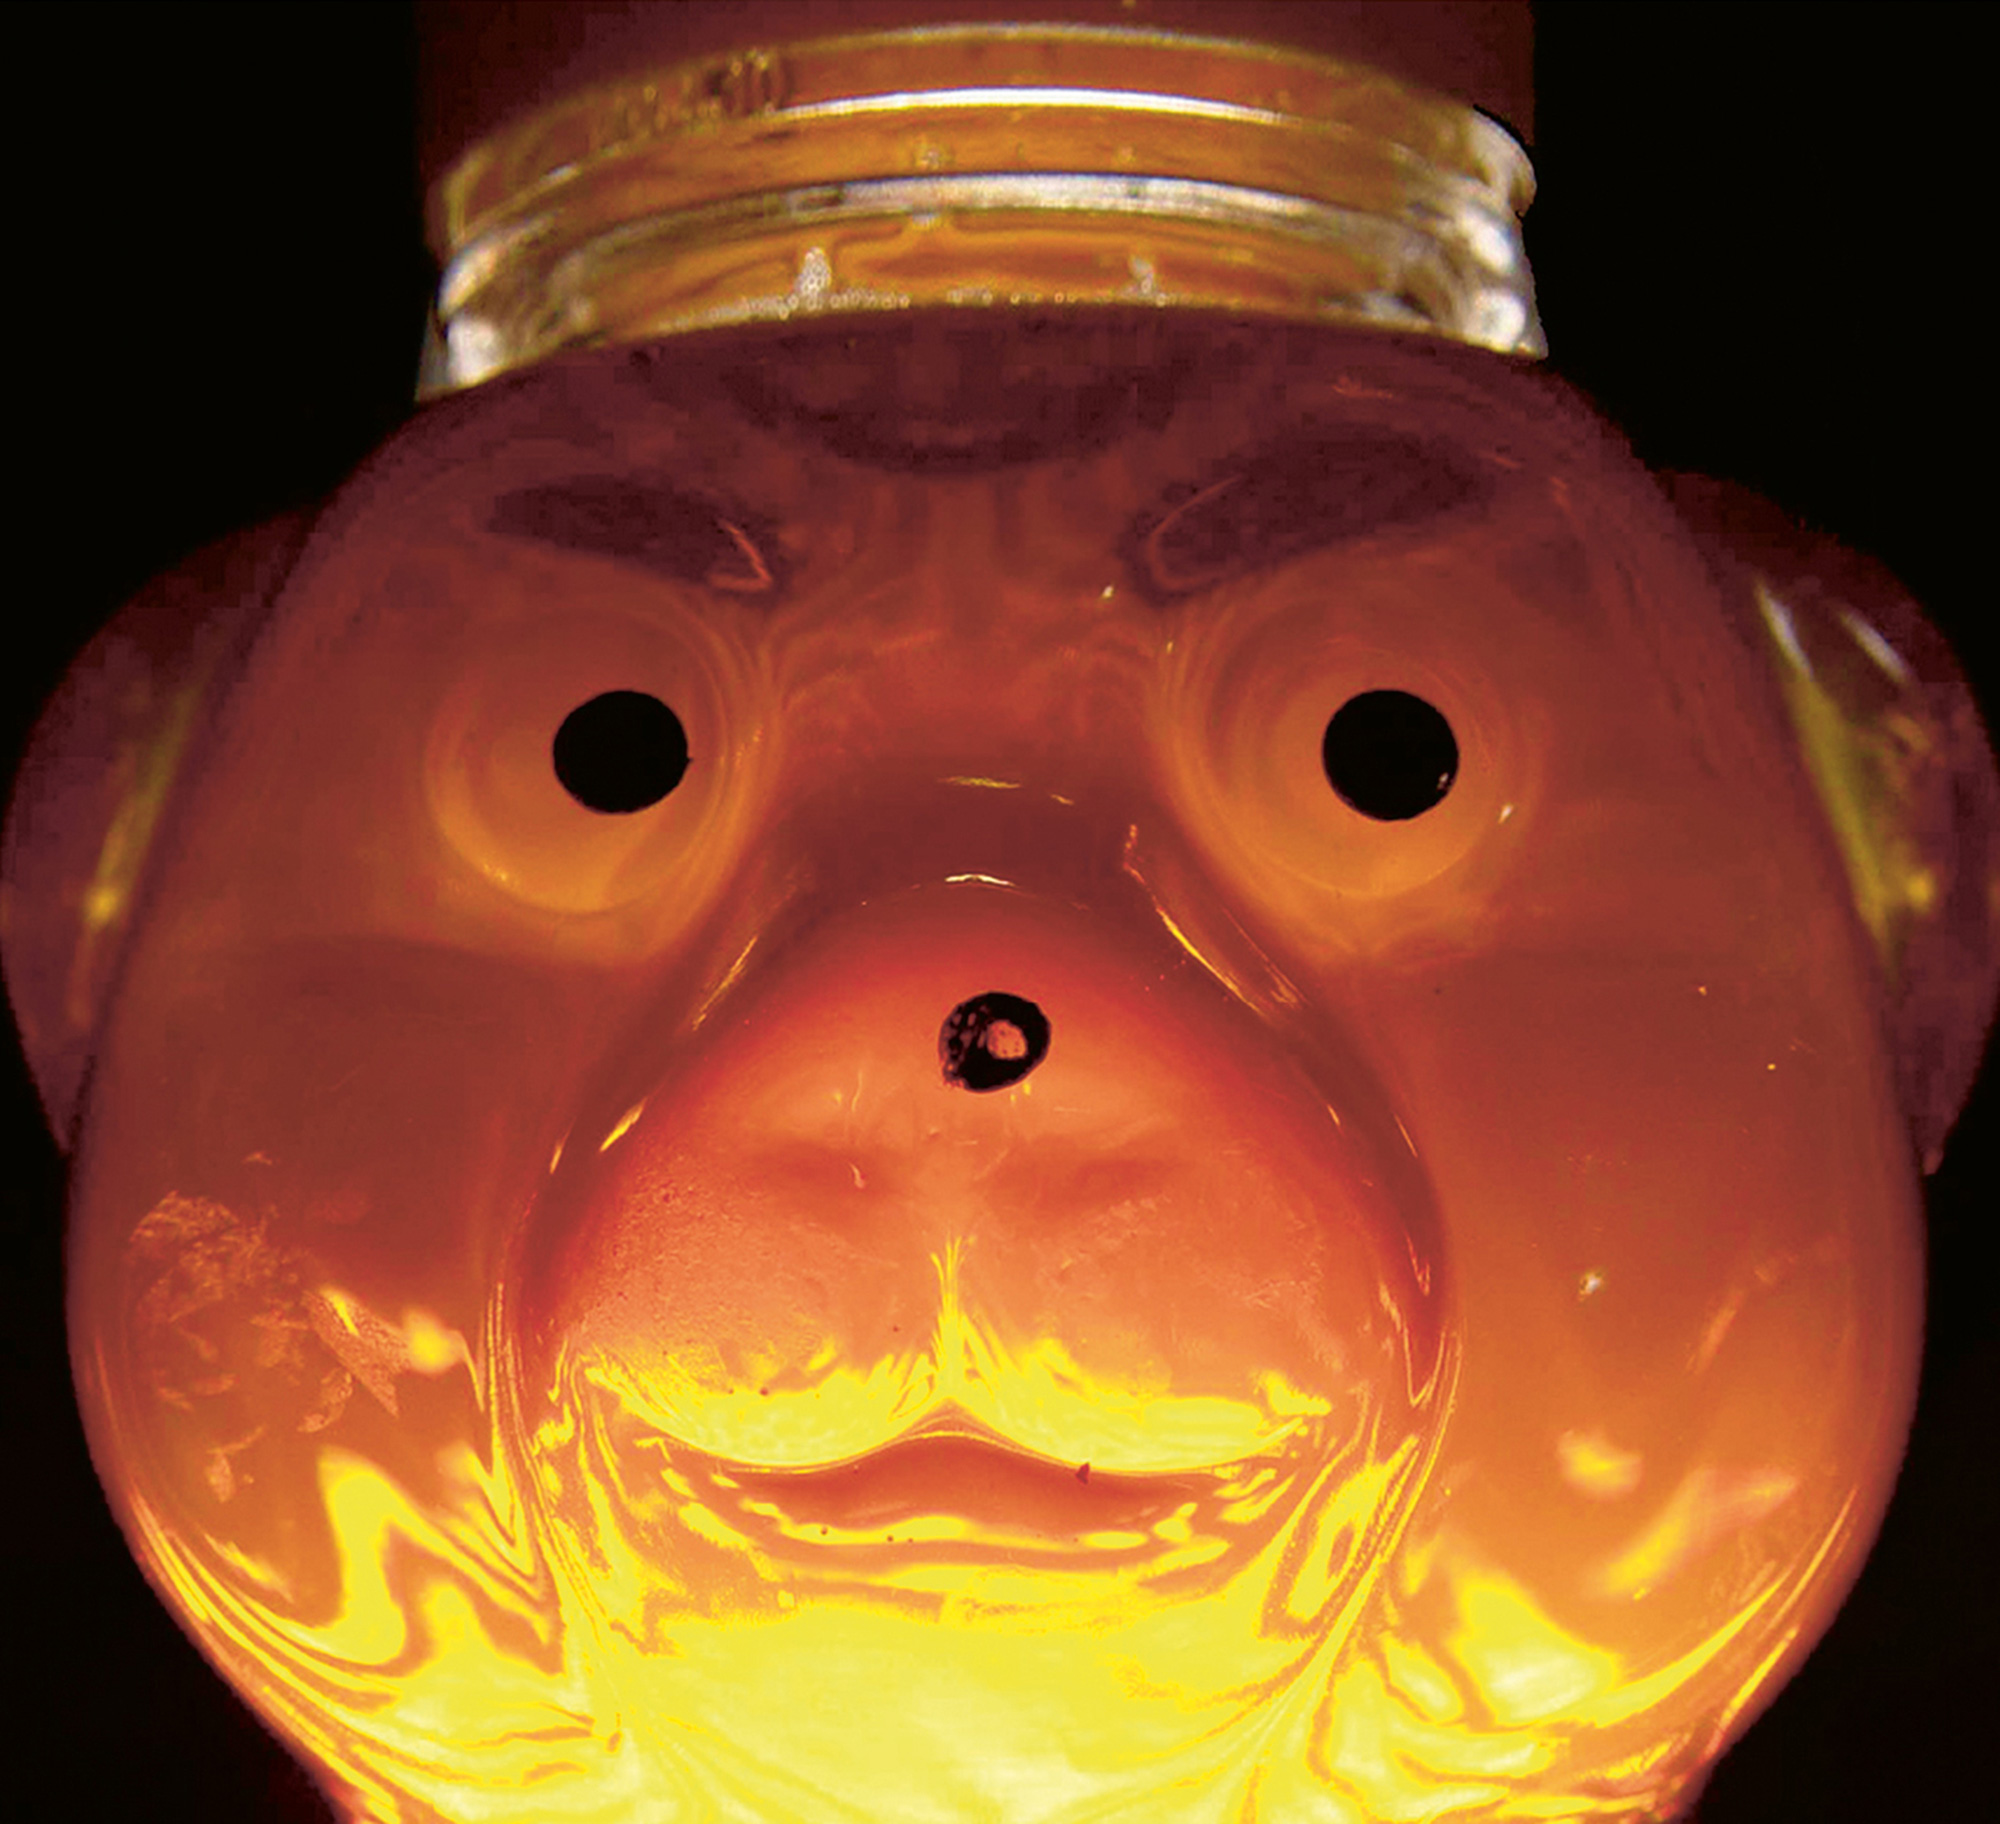 A sinister photograph of the face of a bear-shaped plastic honey bottle.